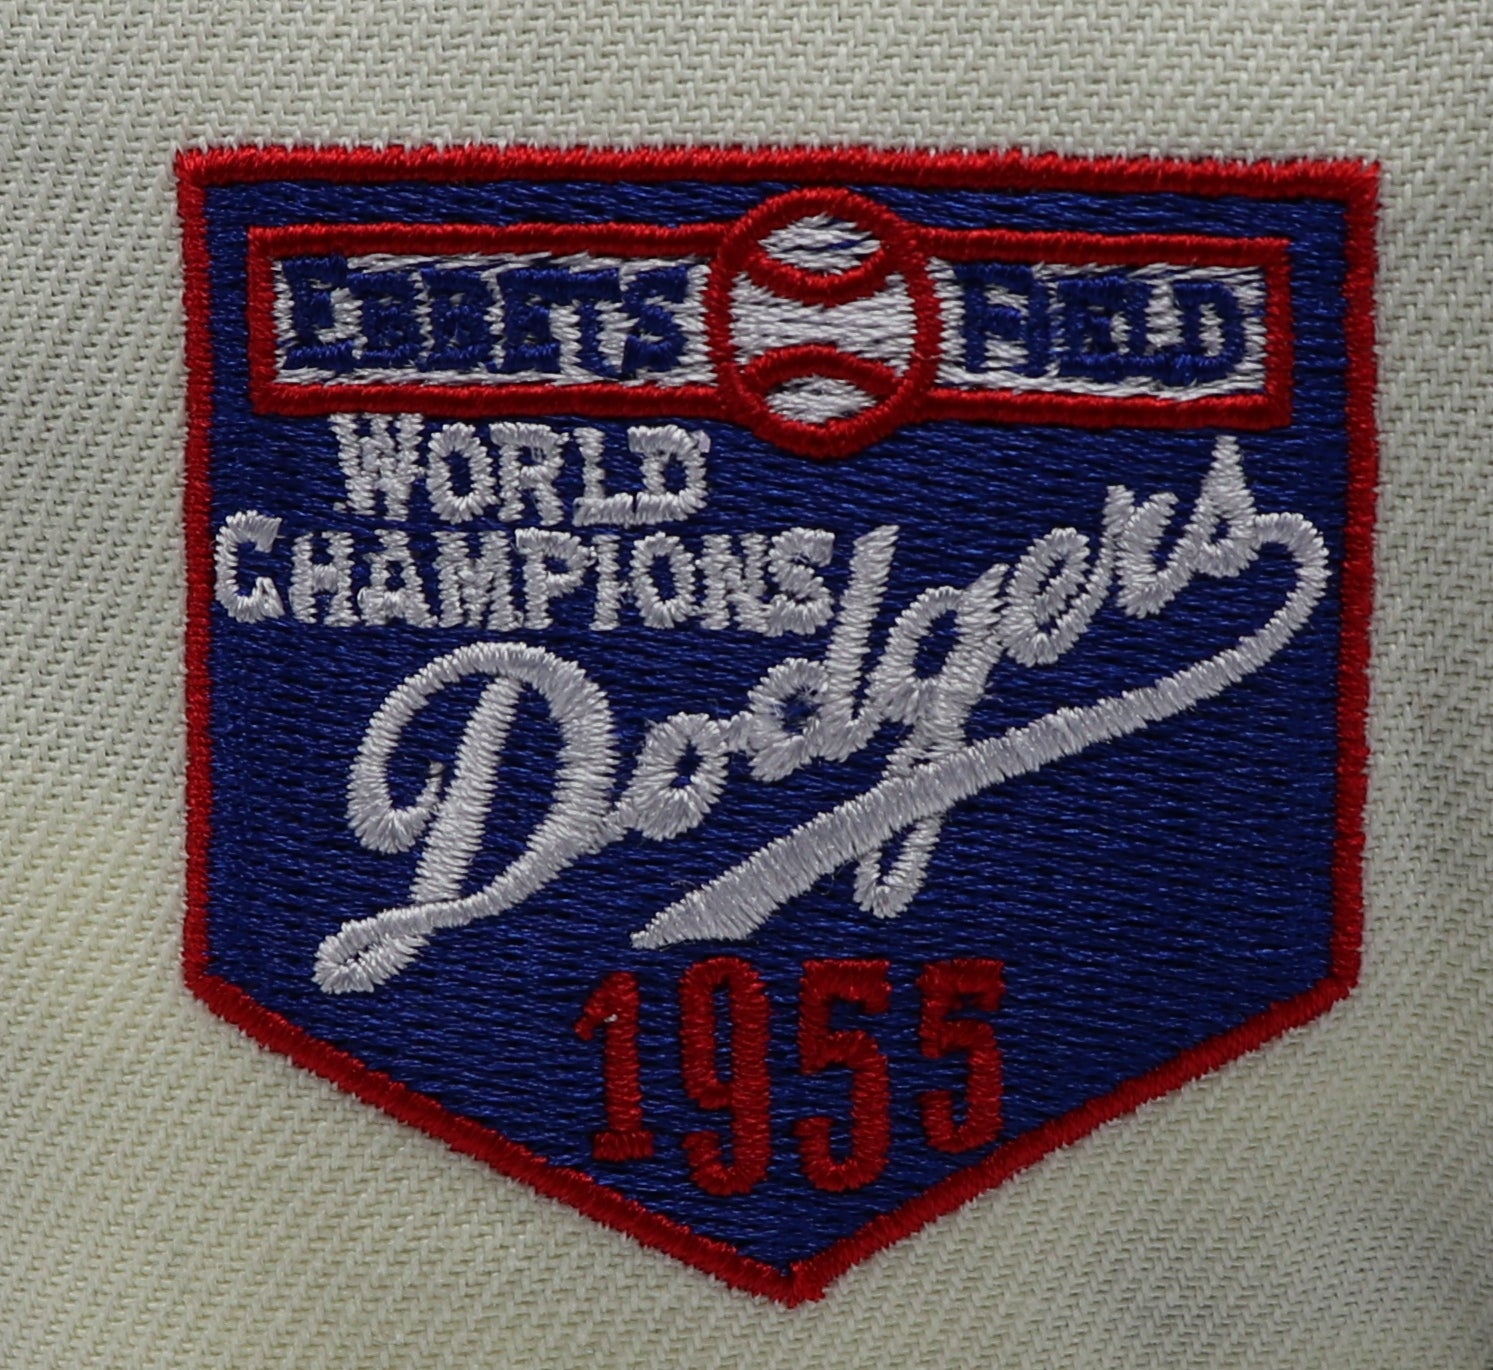 BROOKLYN DODGERS (1955 WORLD SERIES CHAMPIONS) NEW ERA 59FIFTY FITTED